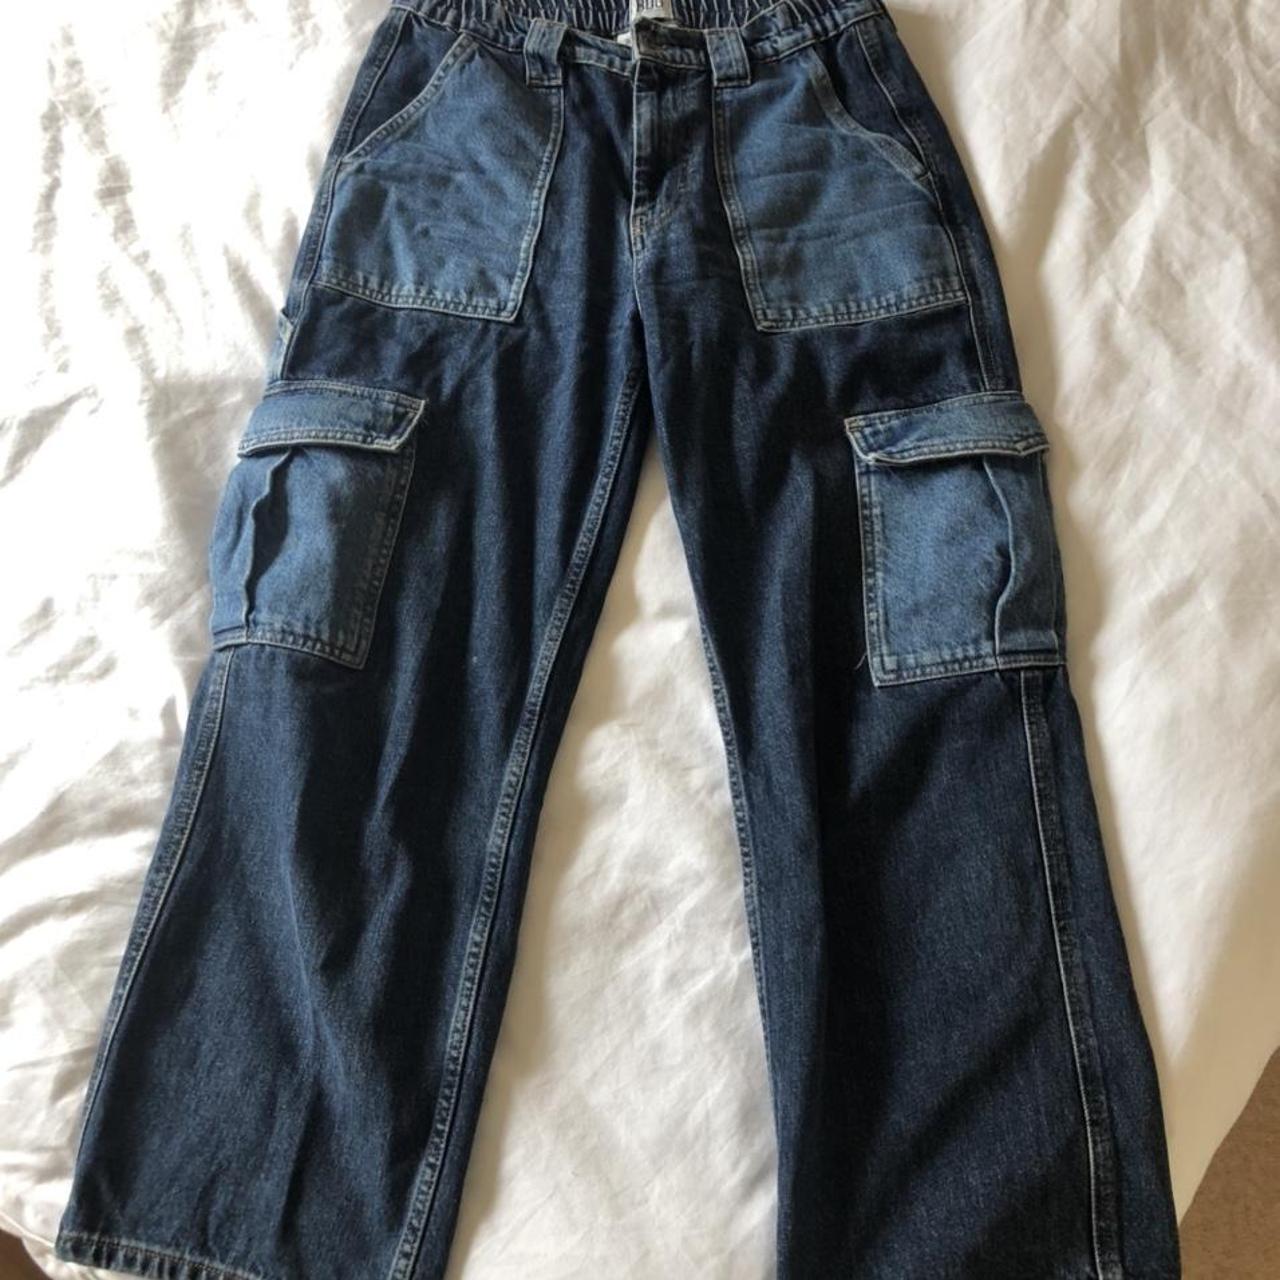 BDG Urban Outfitters Skater jeans size 30... - Depop